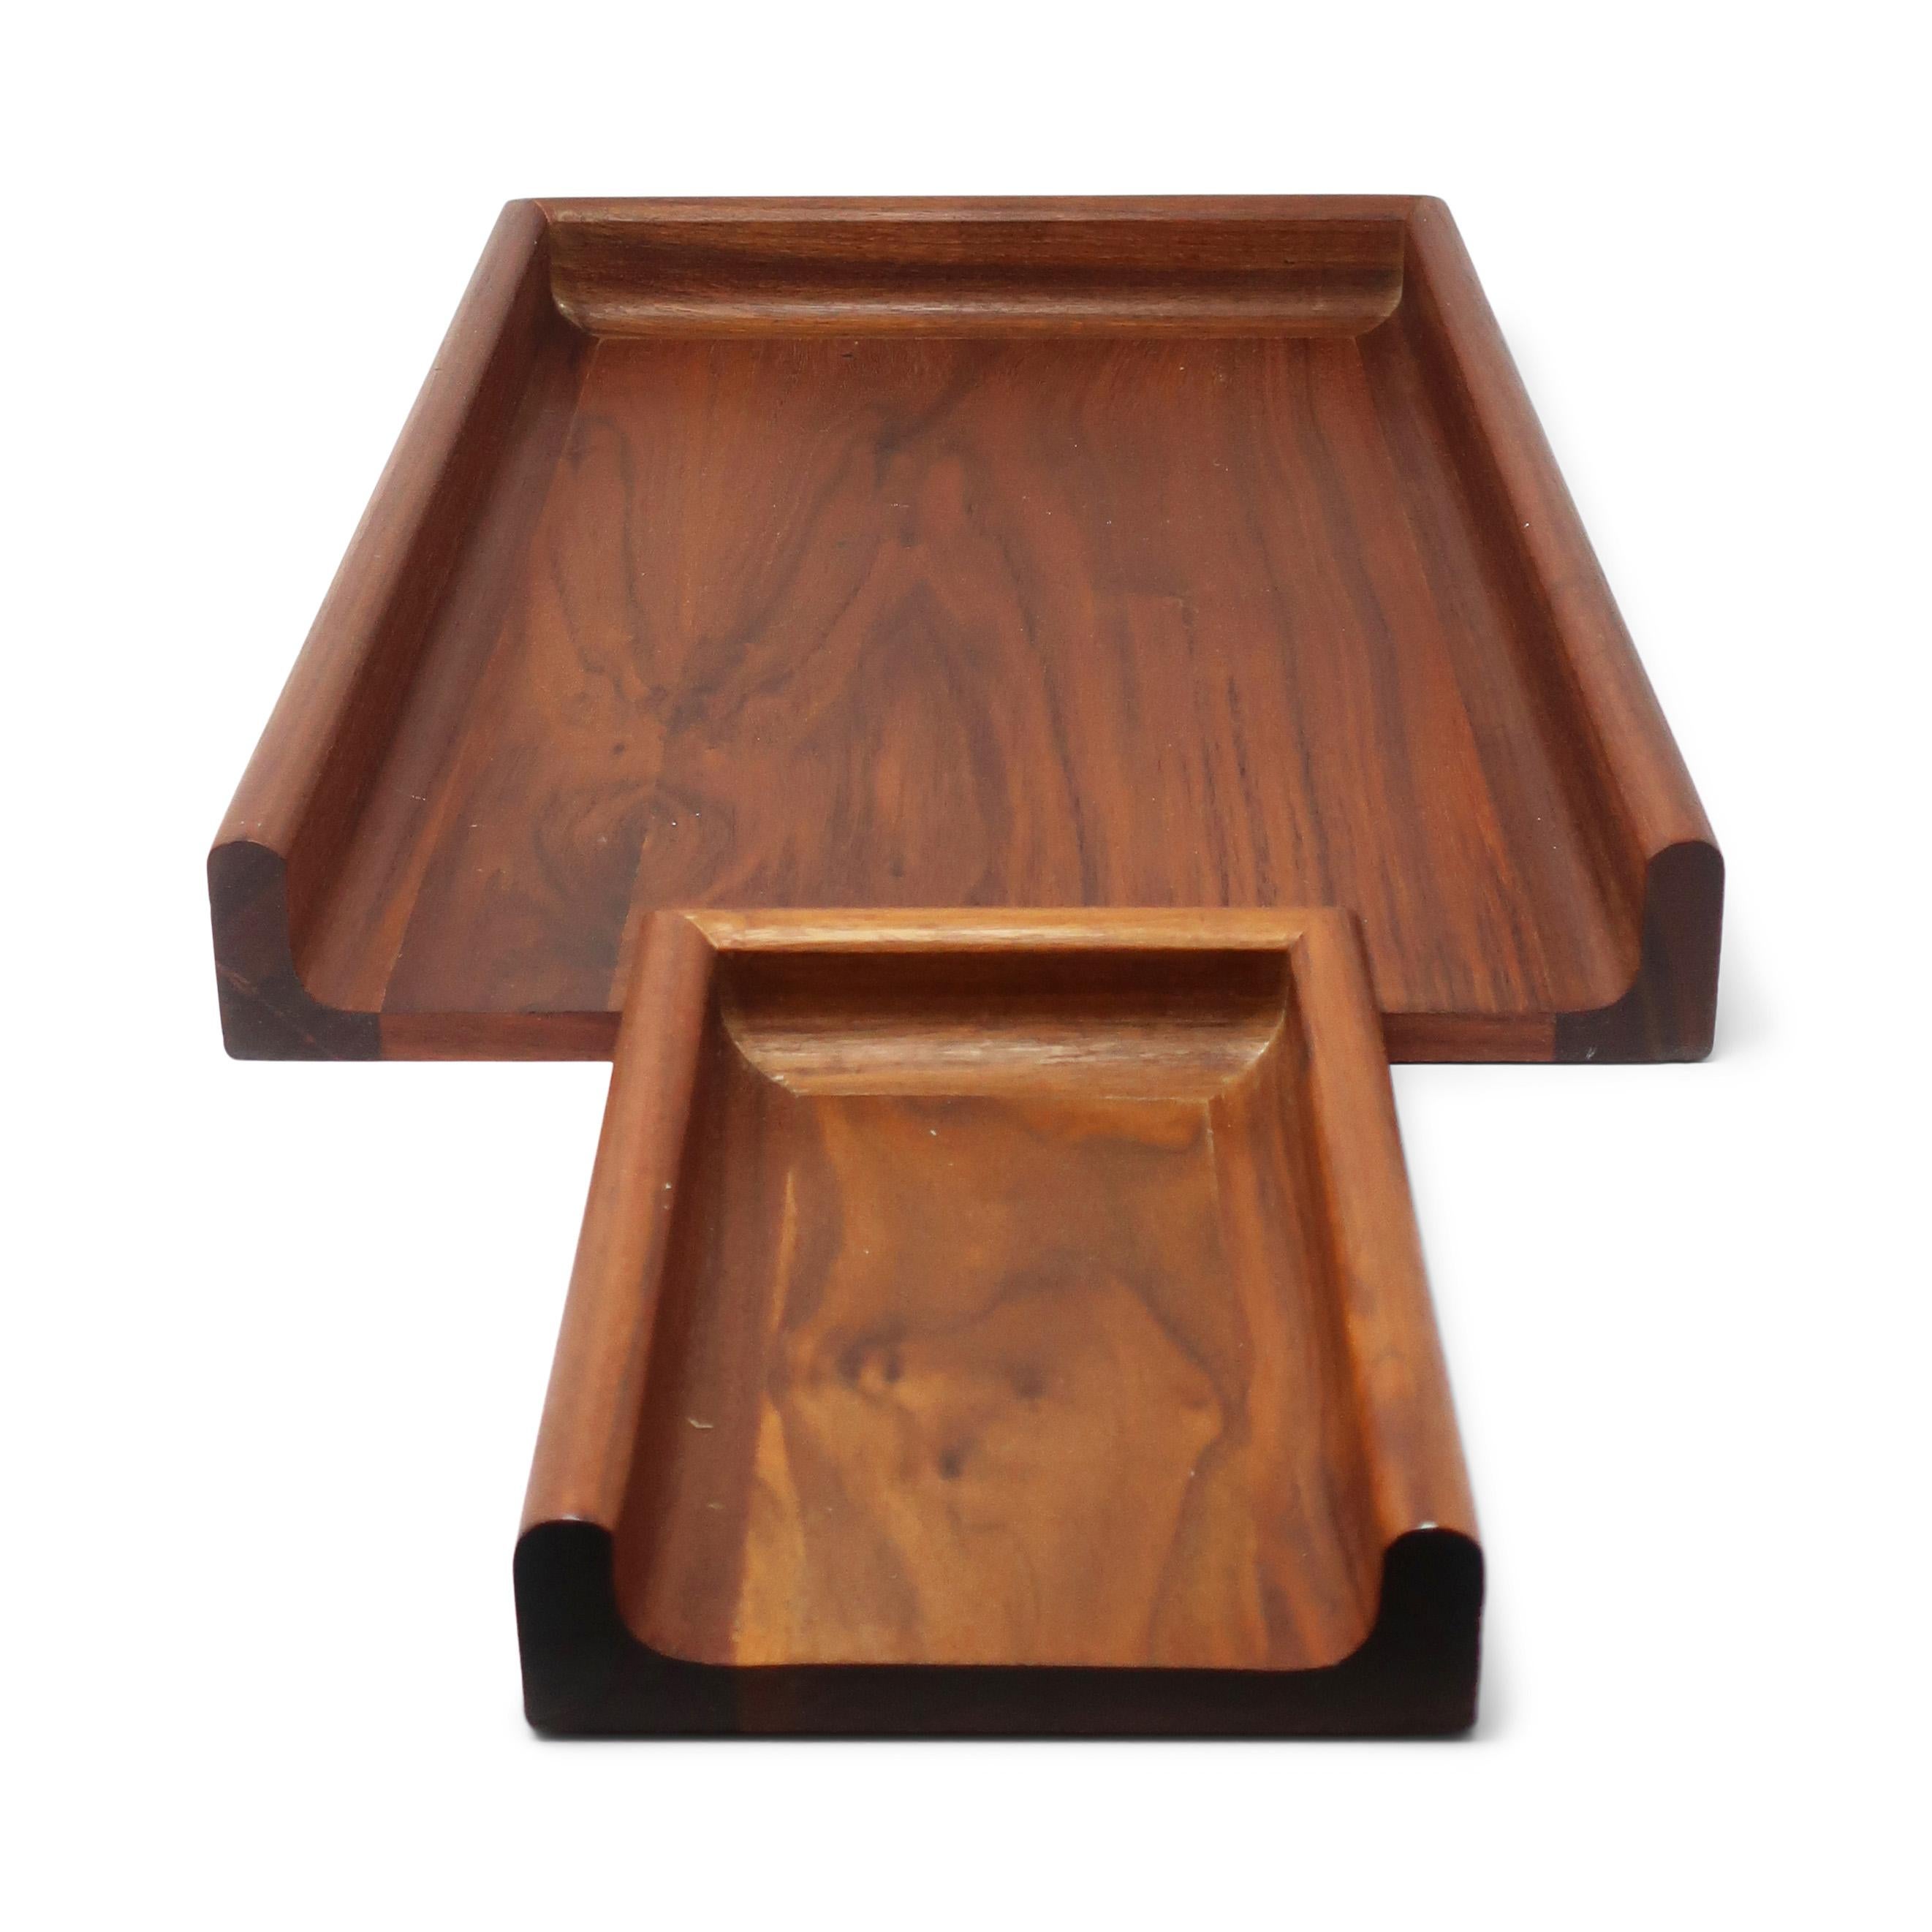 A fantastic pair of vintage walnut paper trays and desk organizers by Peter Pepper Products. One tray is large enough to be used for standard size paper while the other is small enough for note paper, letters, or even business cards. Together they